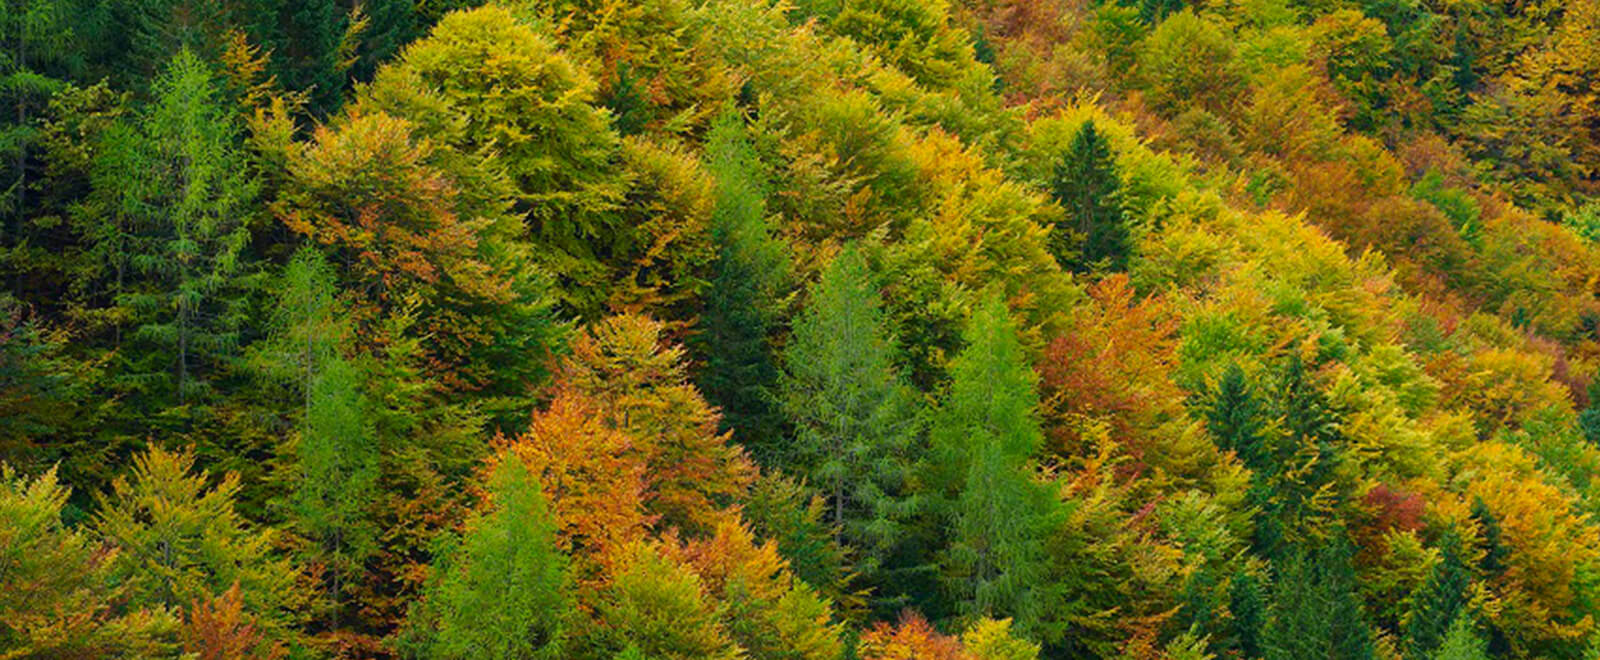 Trees in the forest during Fall season, view from above